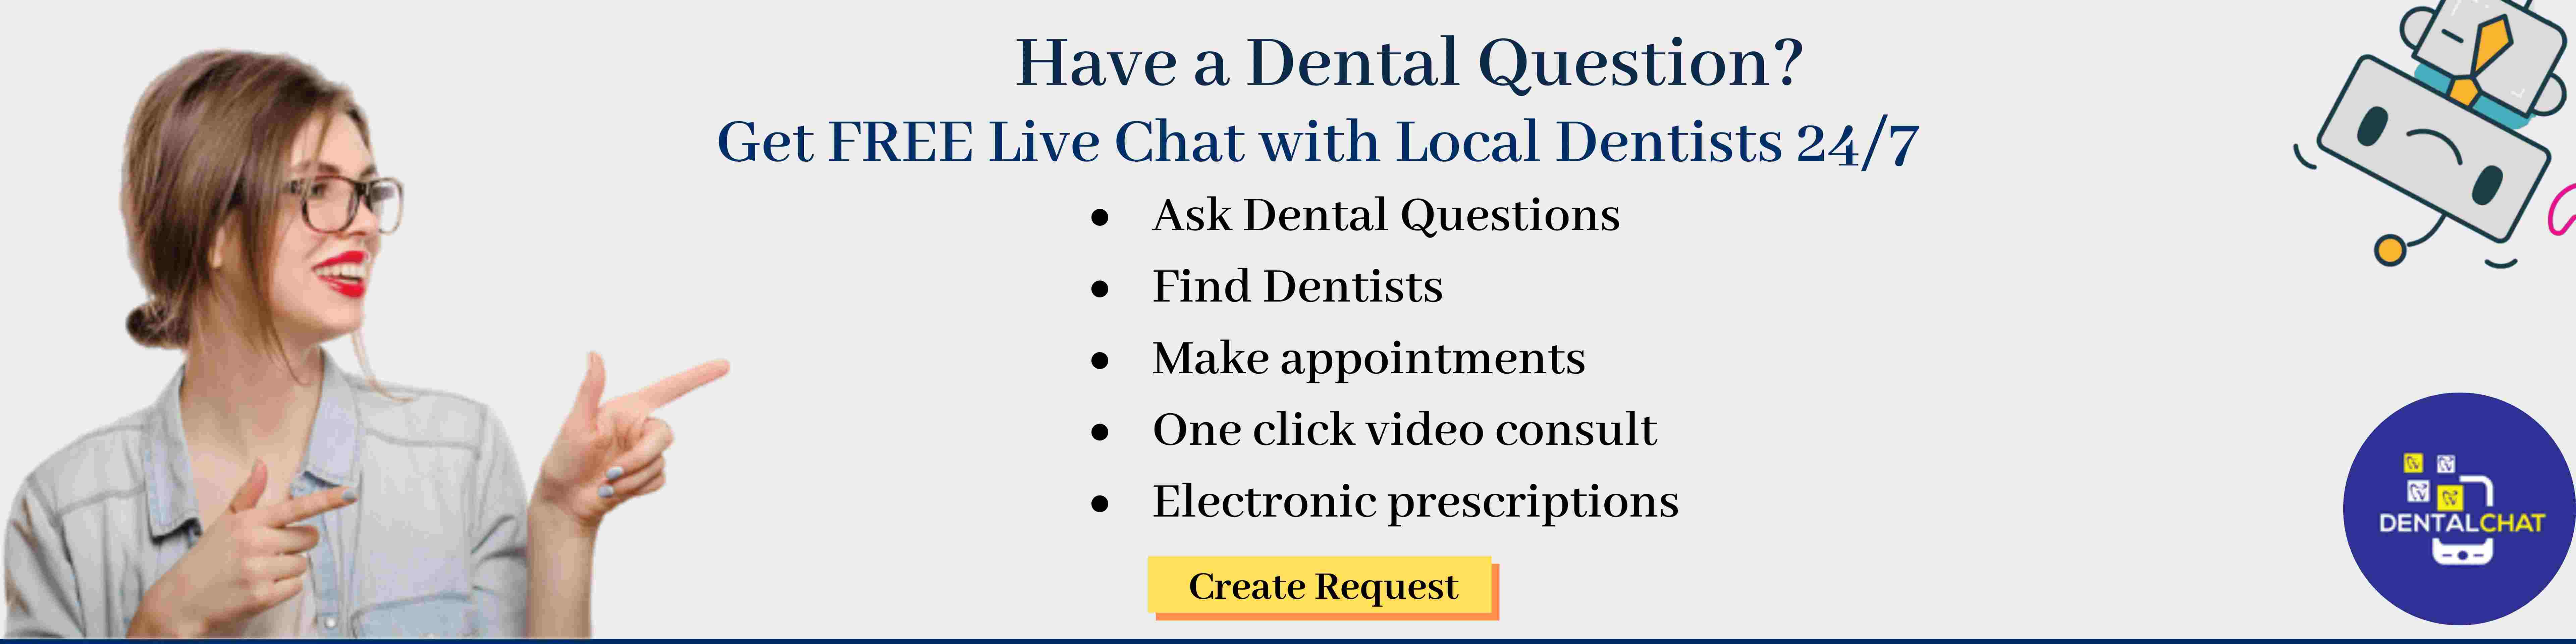 Dental anxiety blog and holistic dentistry chat